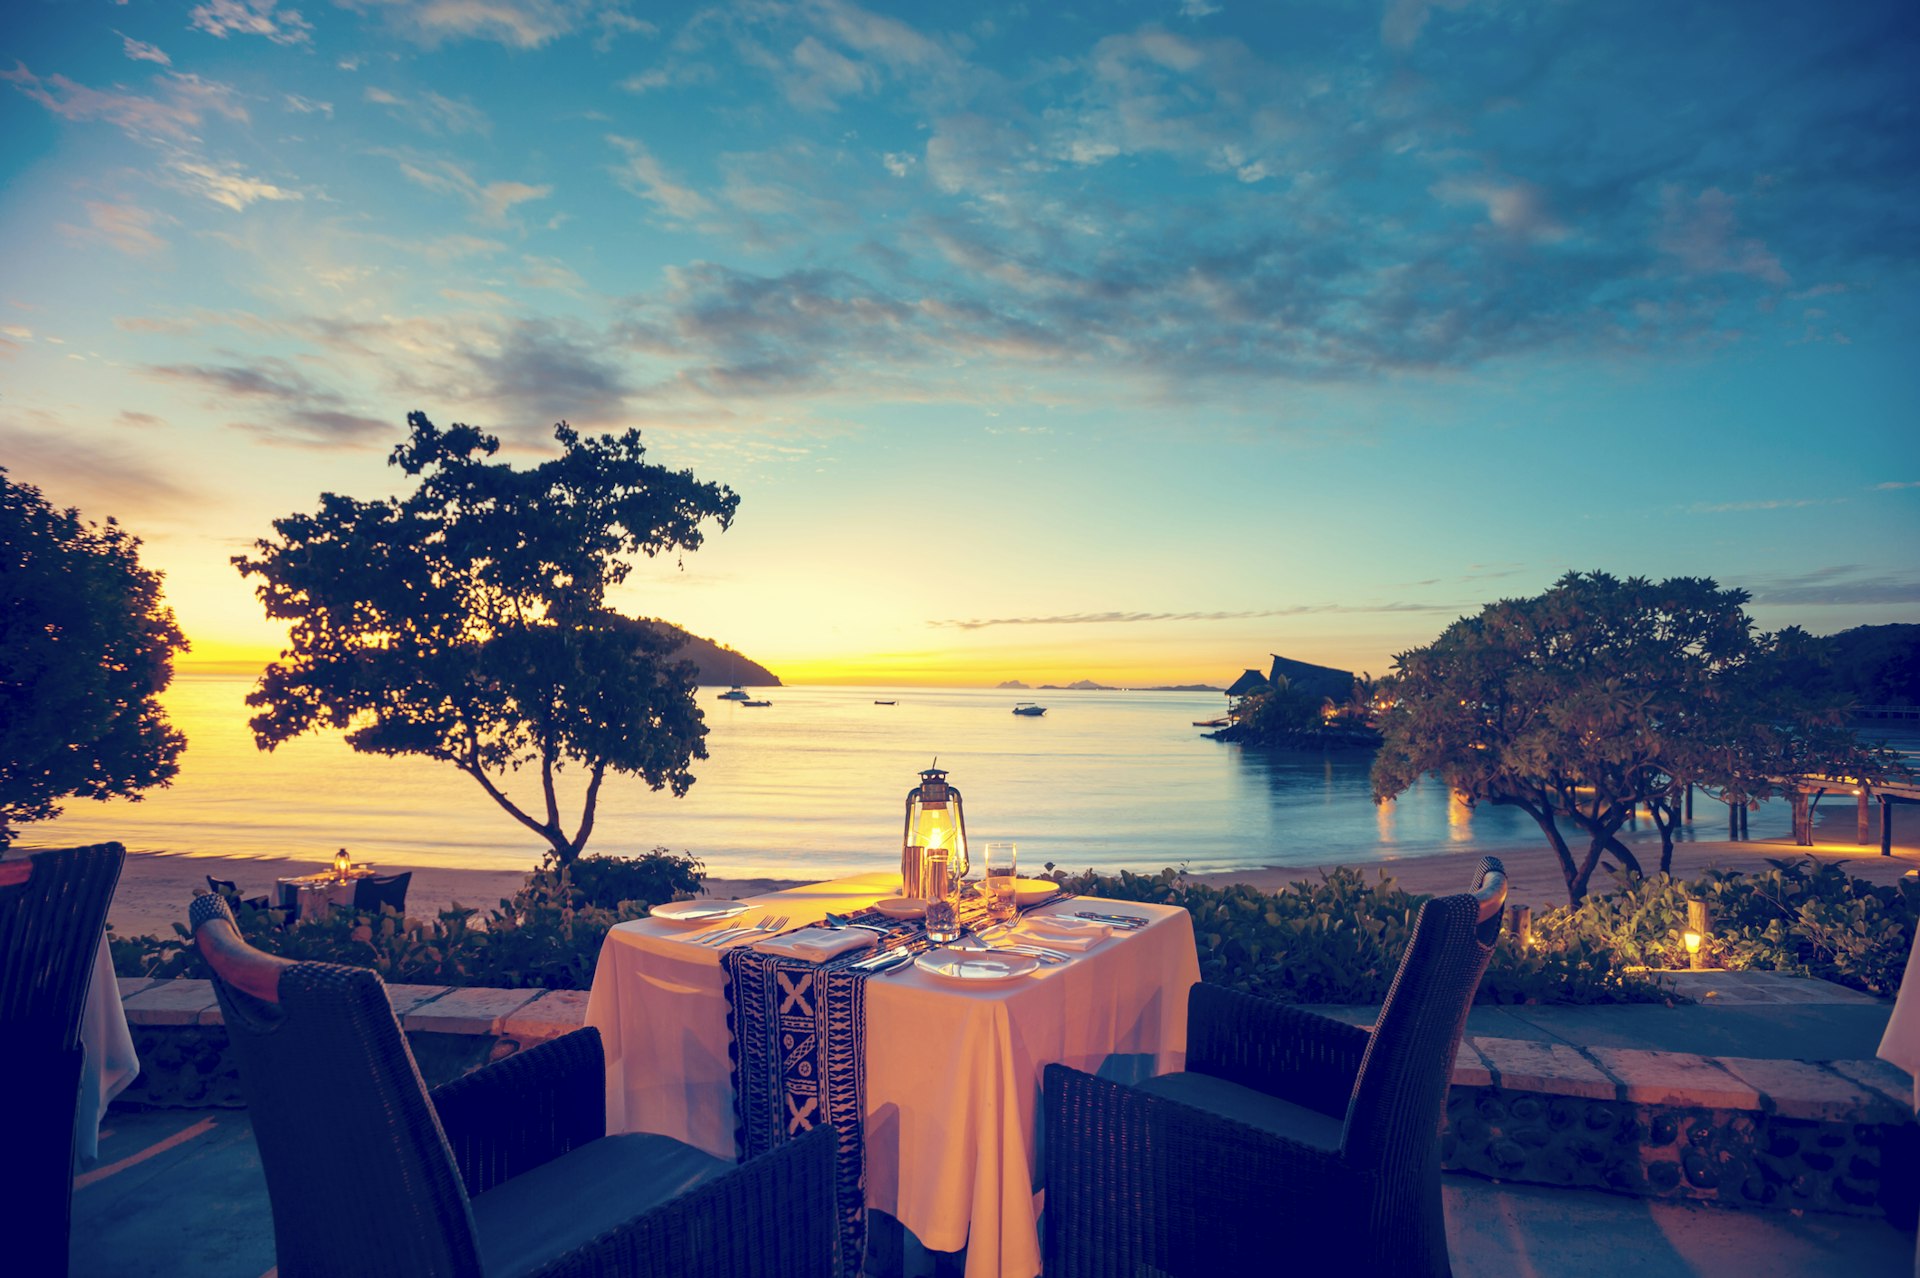 An outdoor table at a restaurant overlooking the ocean as the sun sets